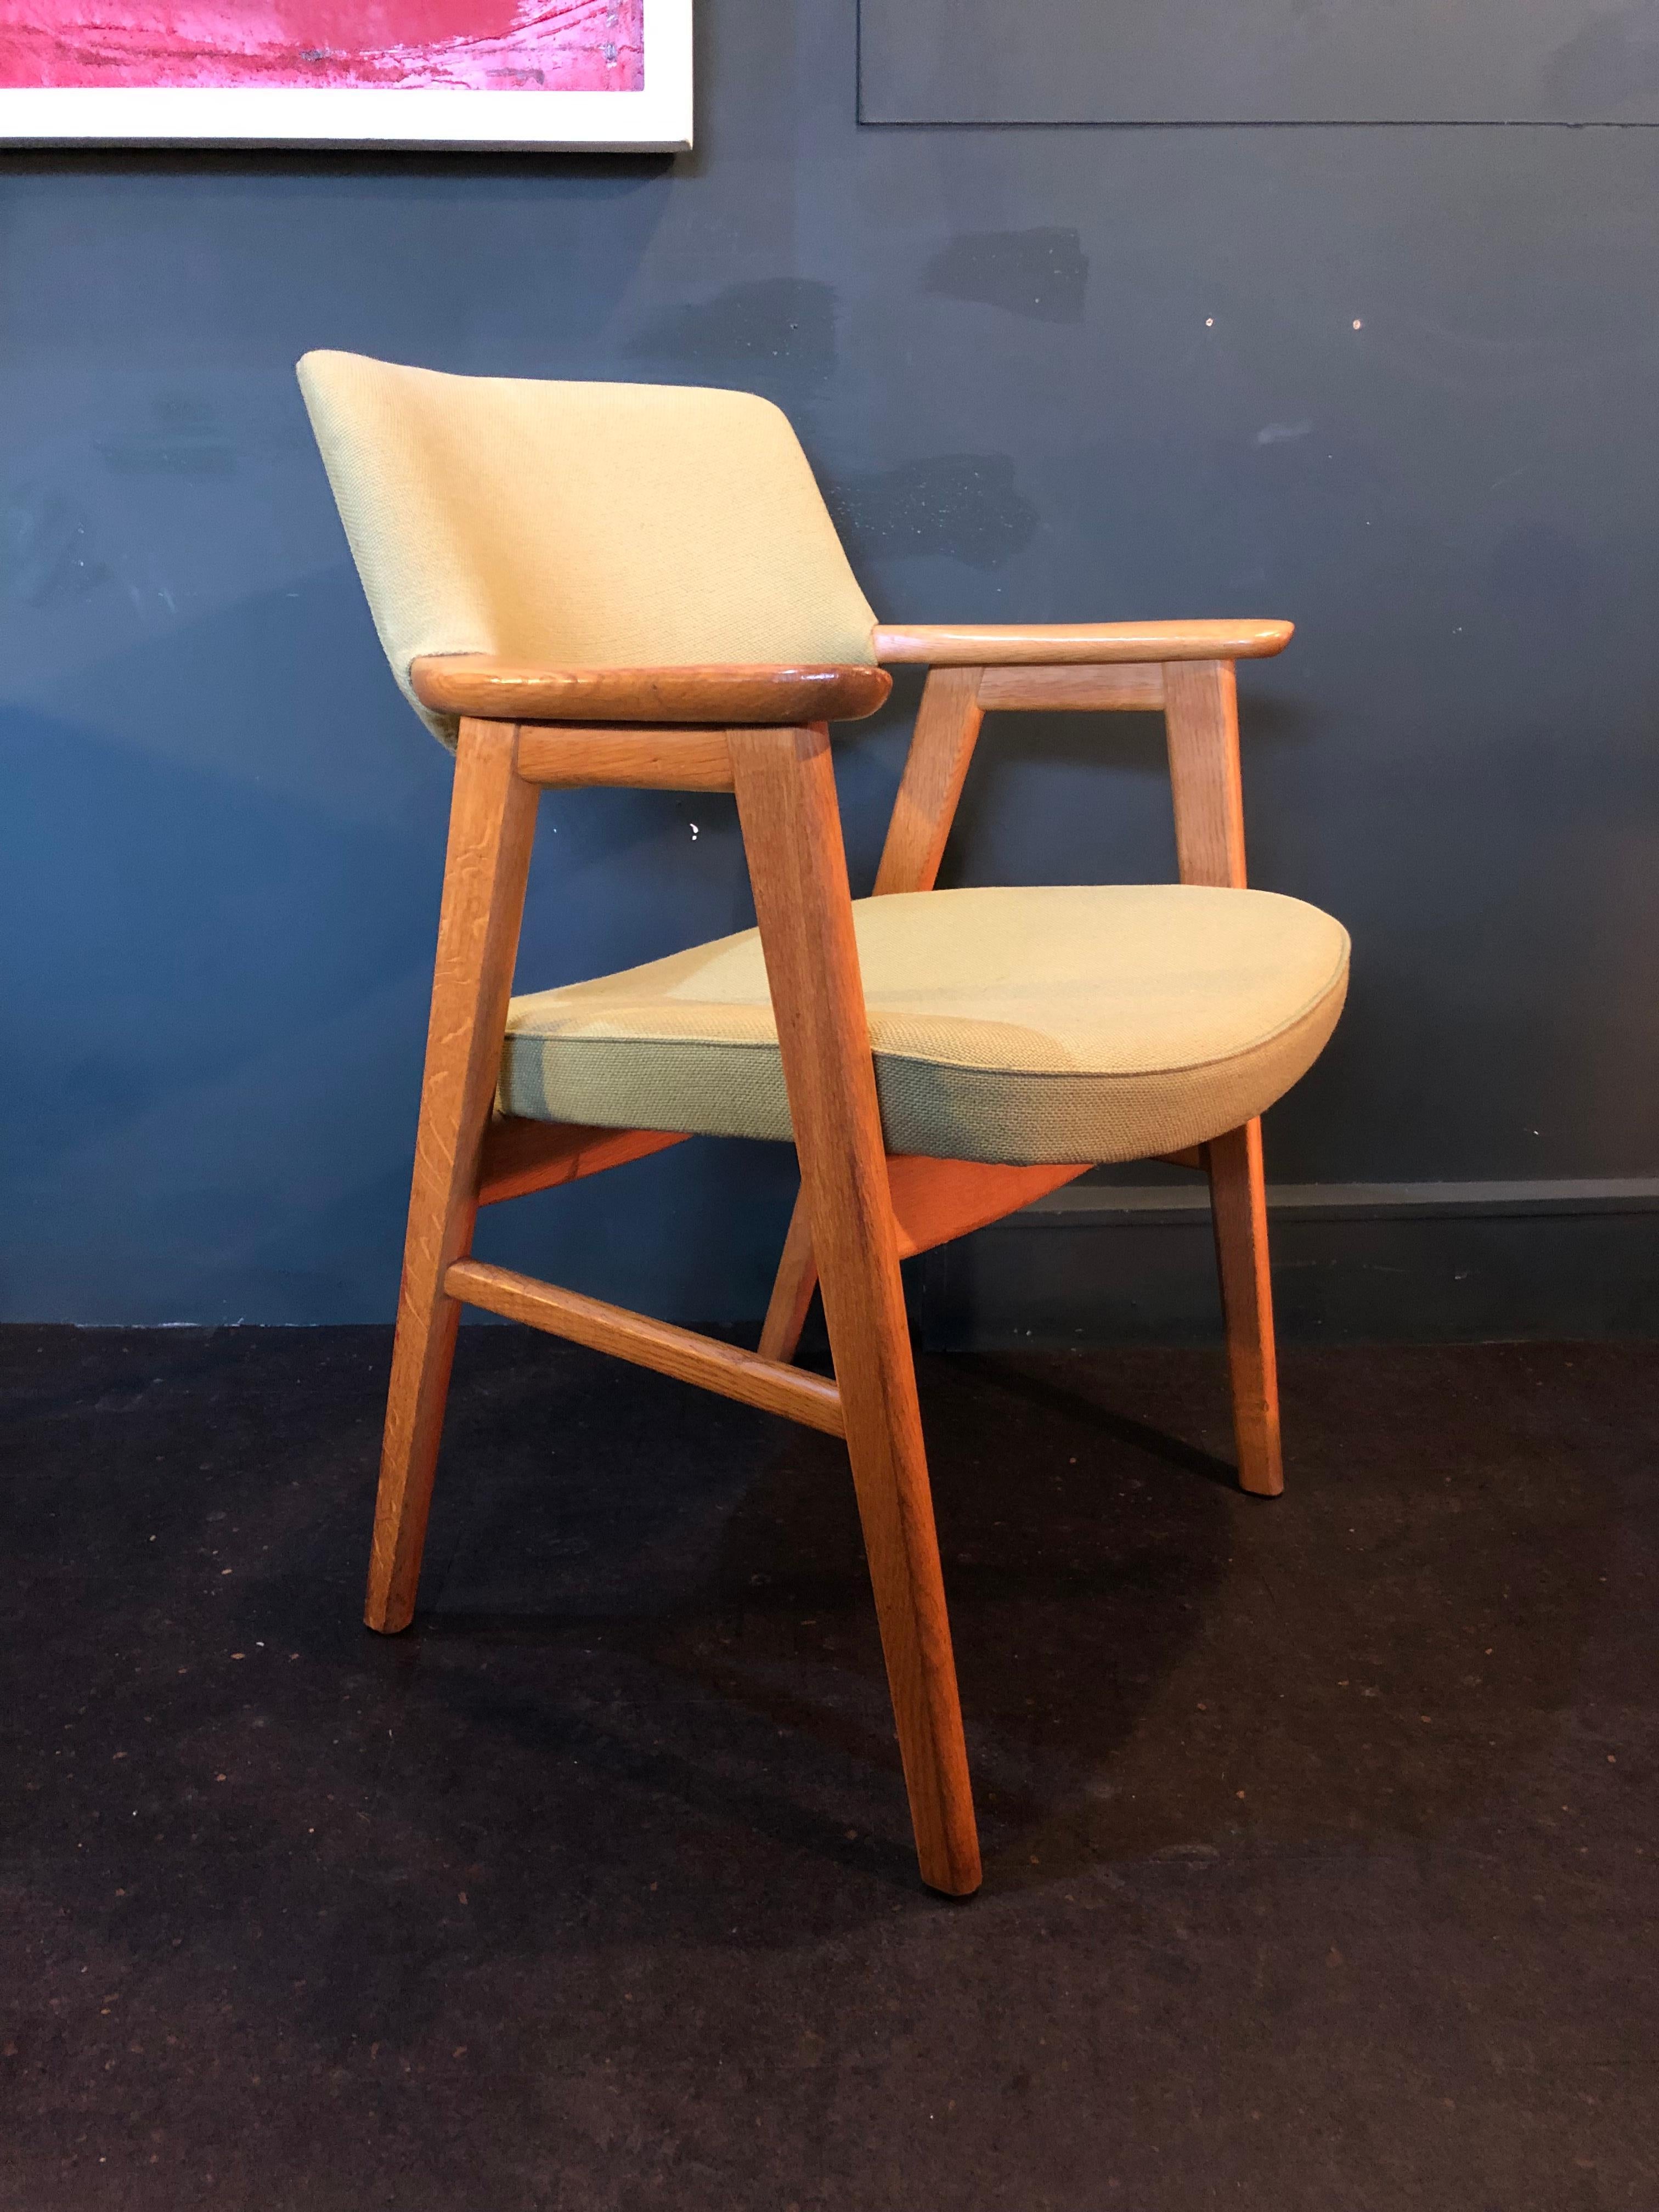 The most comfortable midcentury Scandinavian desk chair designed by Erik Kirkegaard for Hong-Stole, 1950s, Denmark. European quarter sawn oak frame with pale sage upholstery.
Thoroughly cleaned and polished.
  